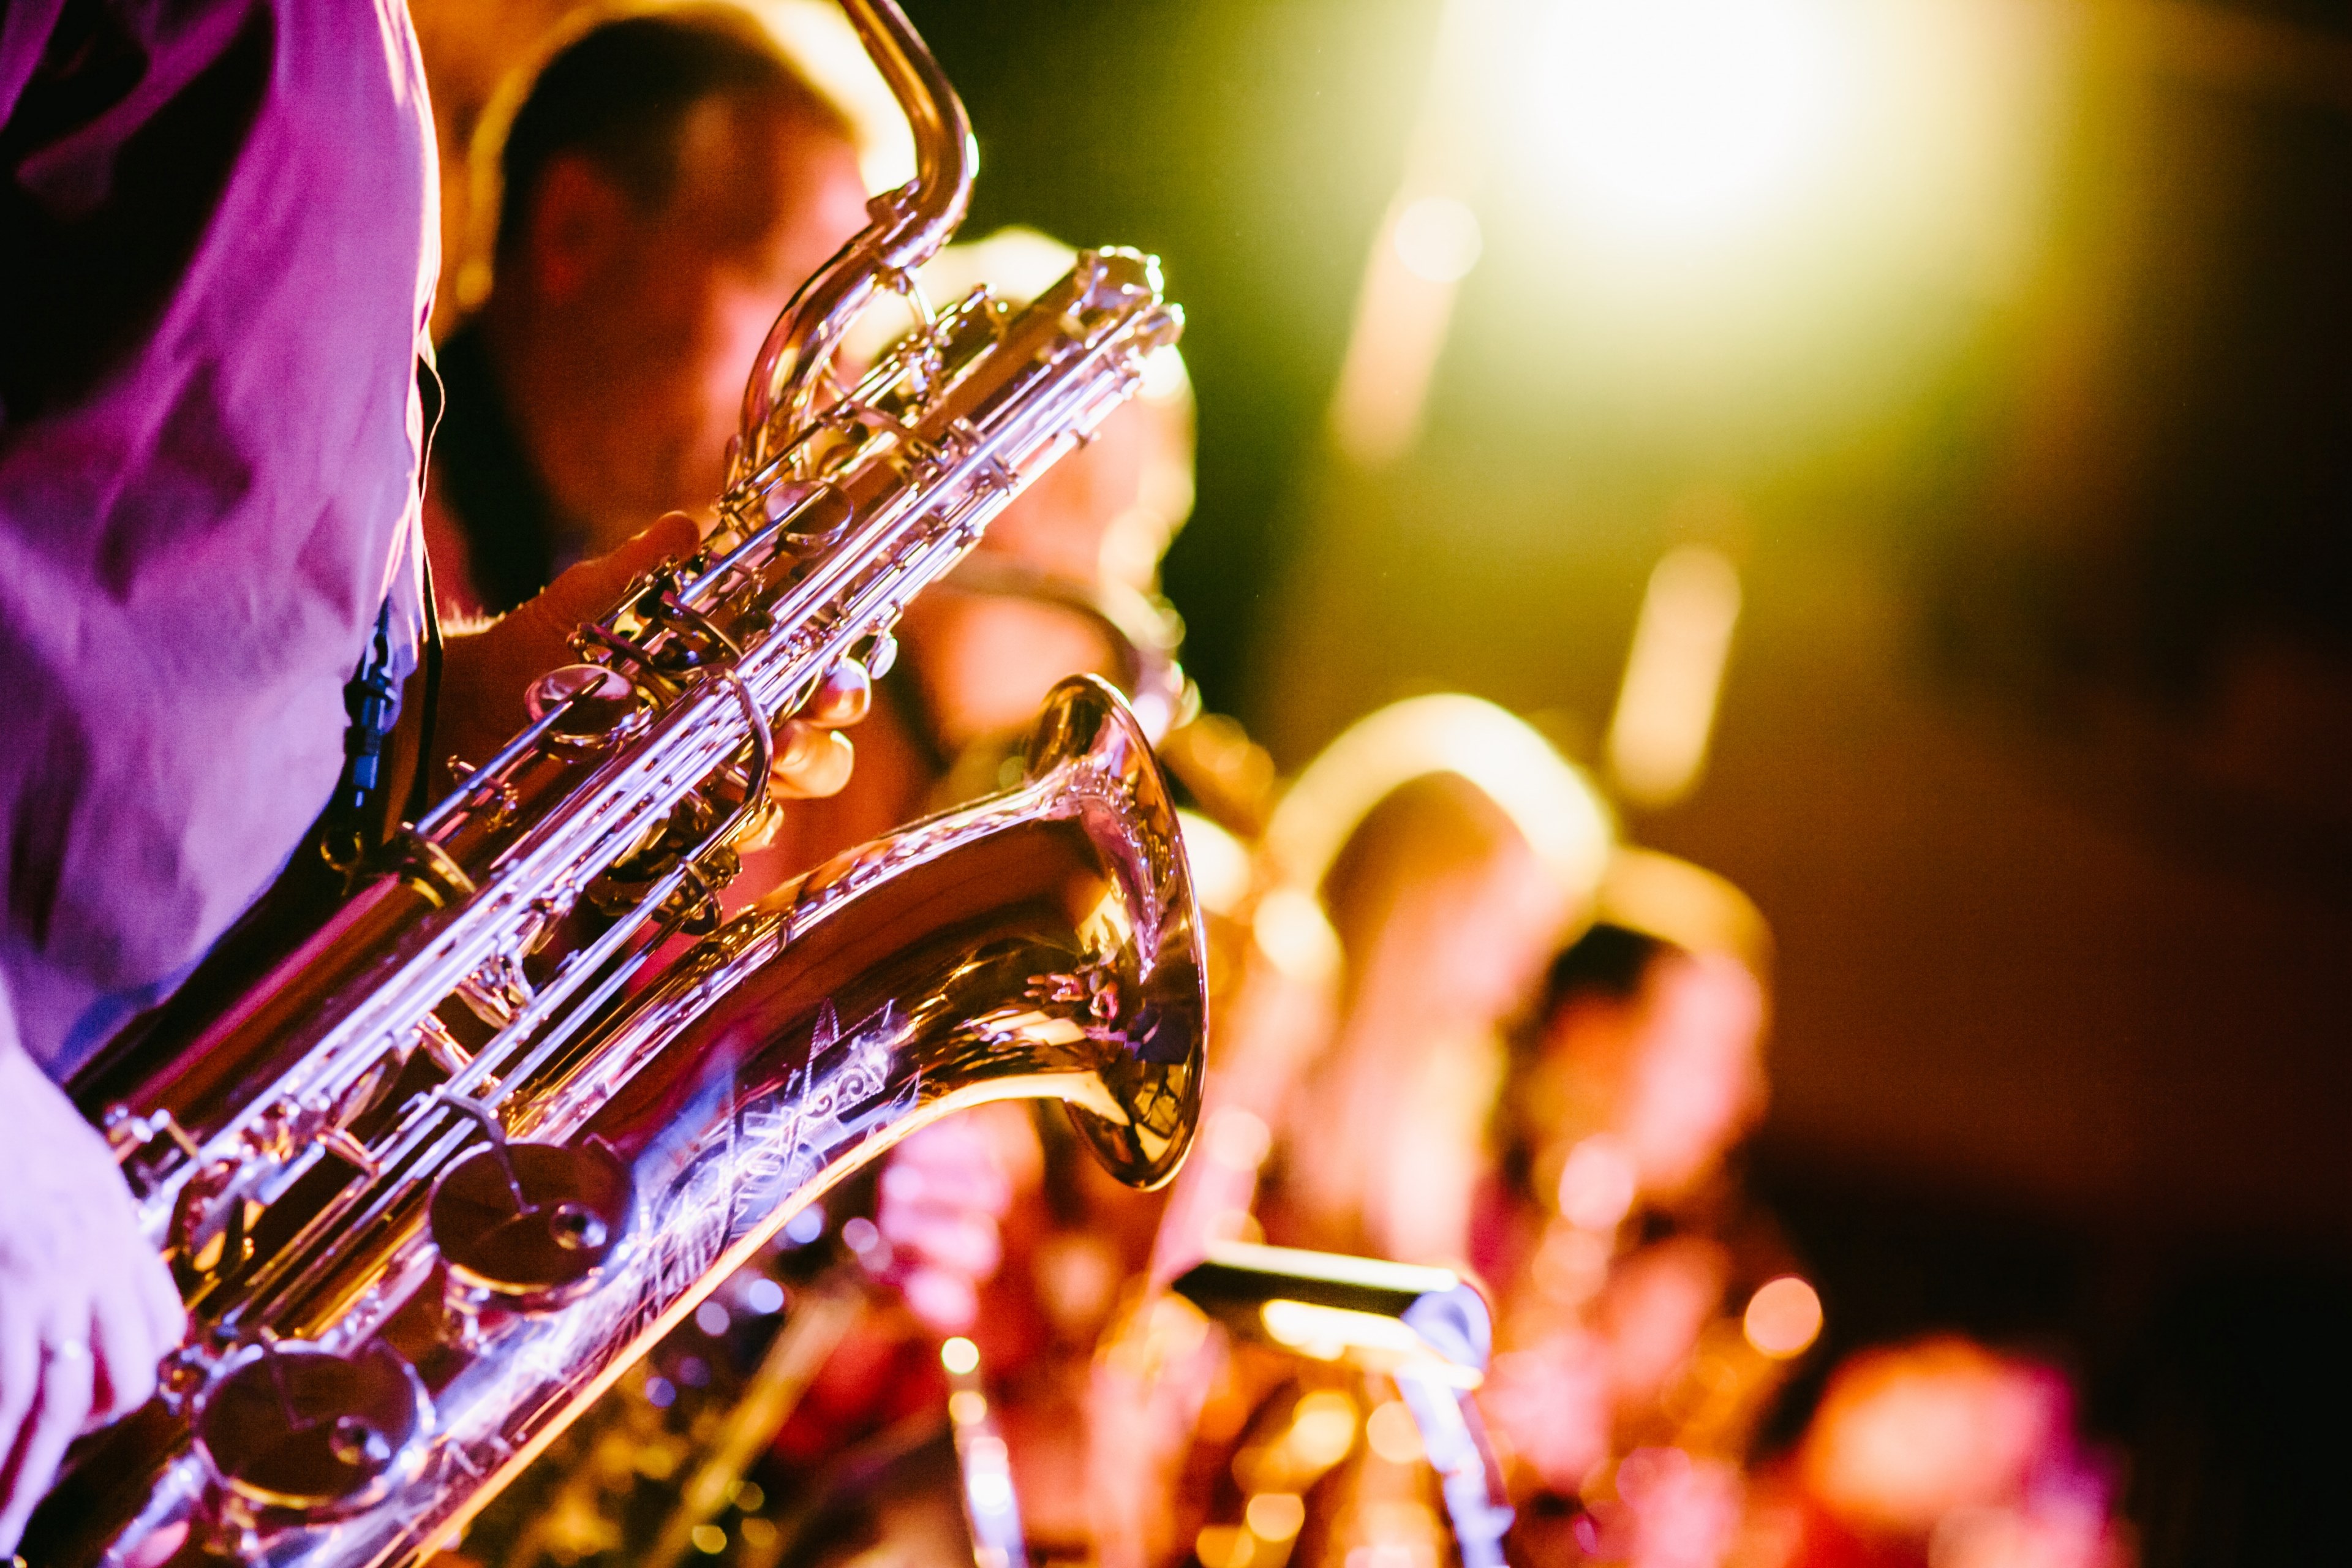 Wallpaper / a close up of a saxophone held by one of the band members during a jazz concert, colorful jazz concert 4k wallpaper